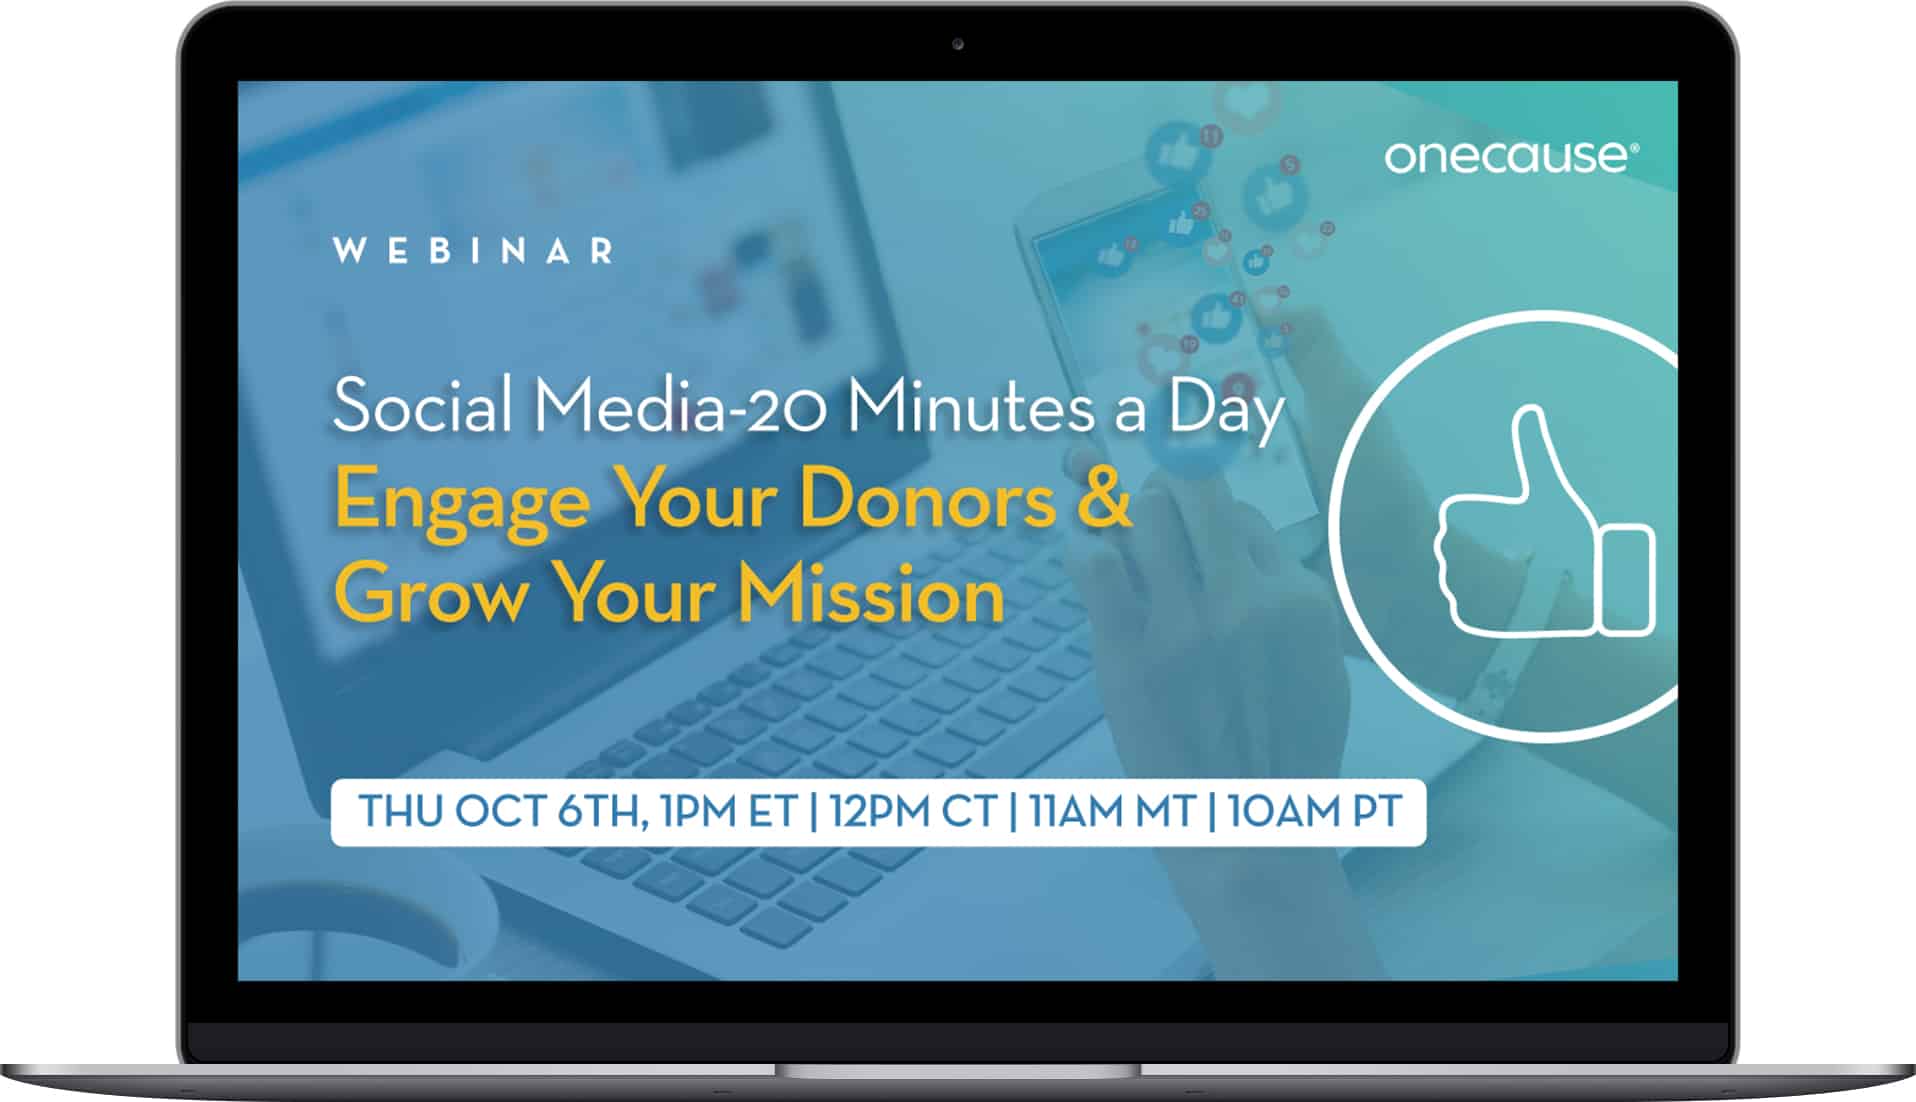 Social Media - 20 Minutes a Day: Engage Your Donors & Grow Your Mission